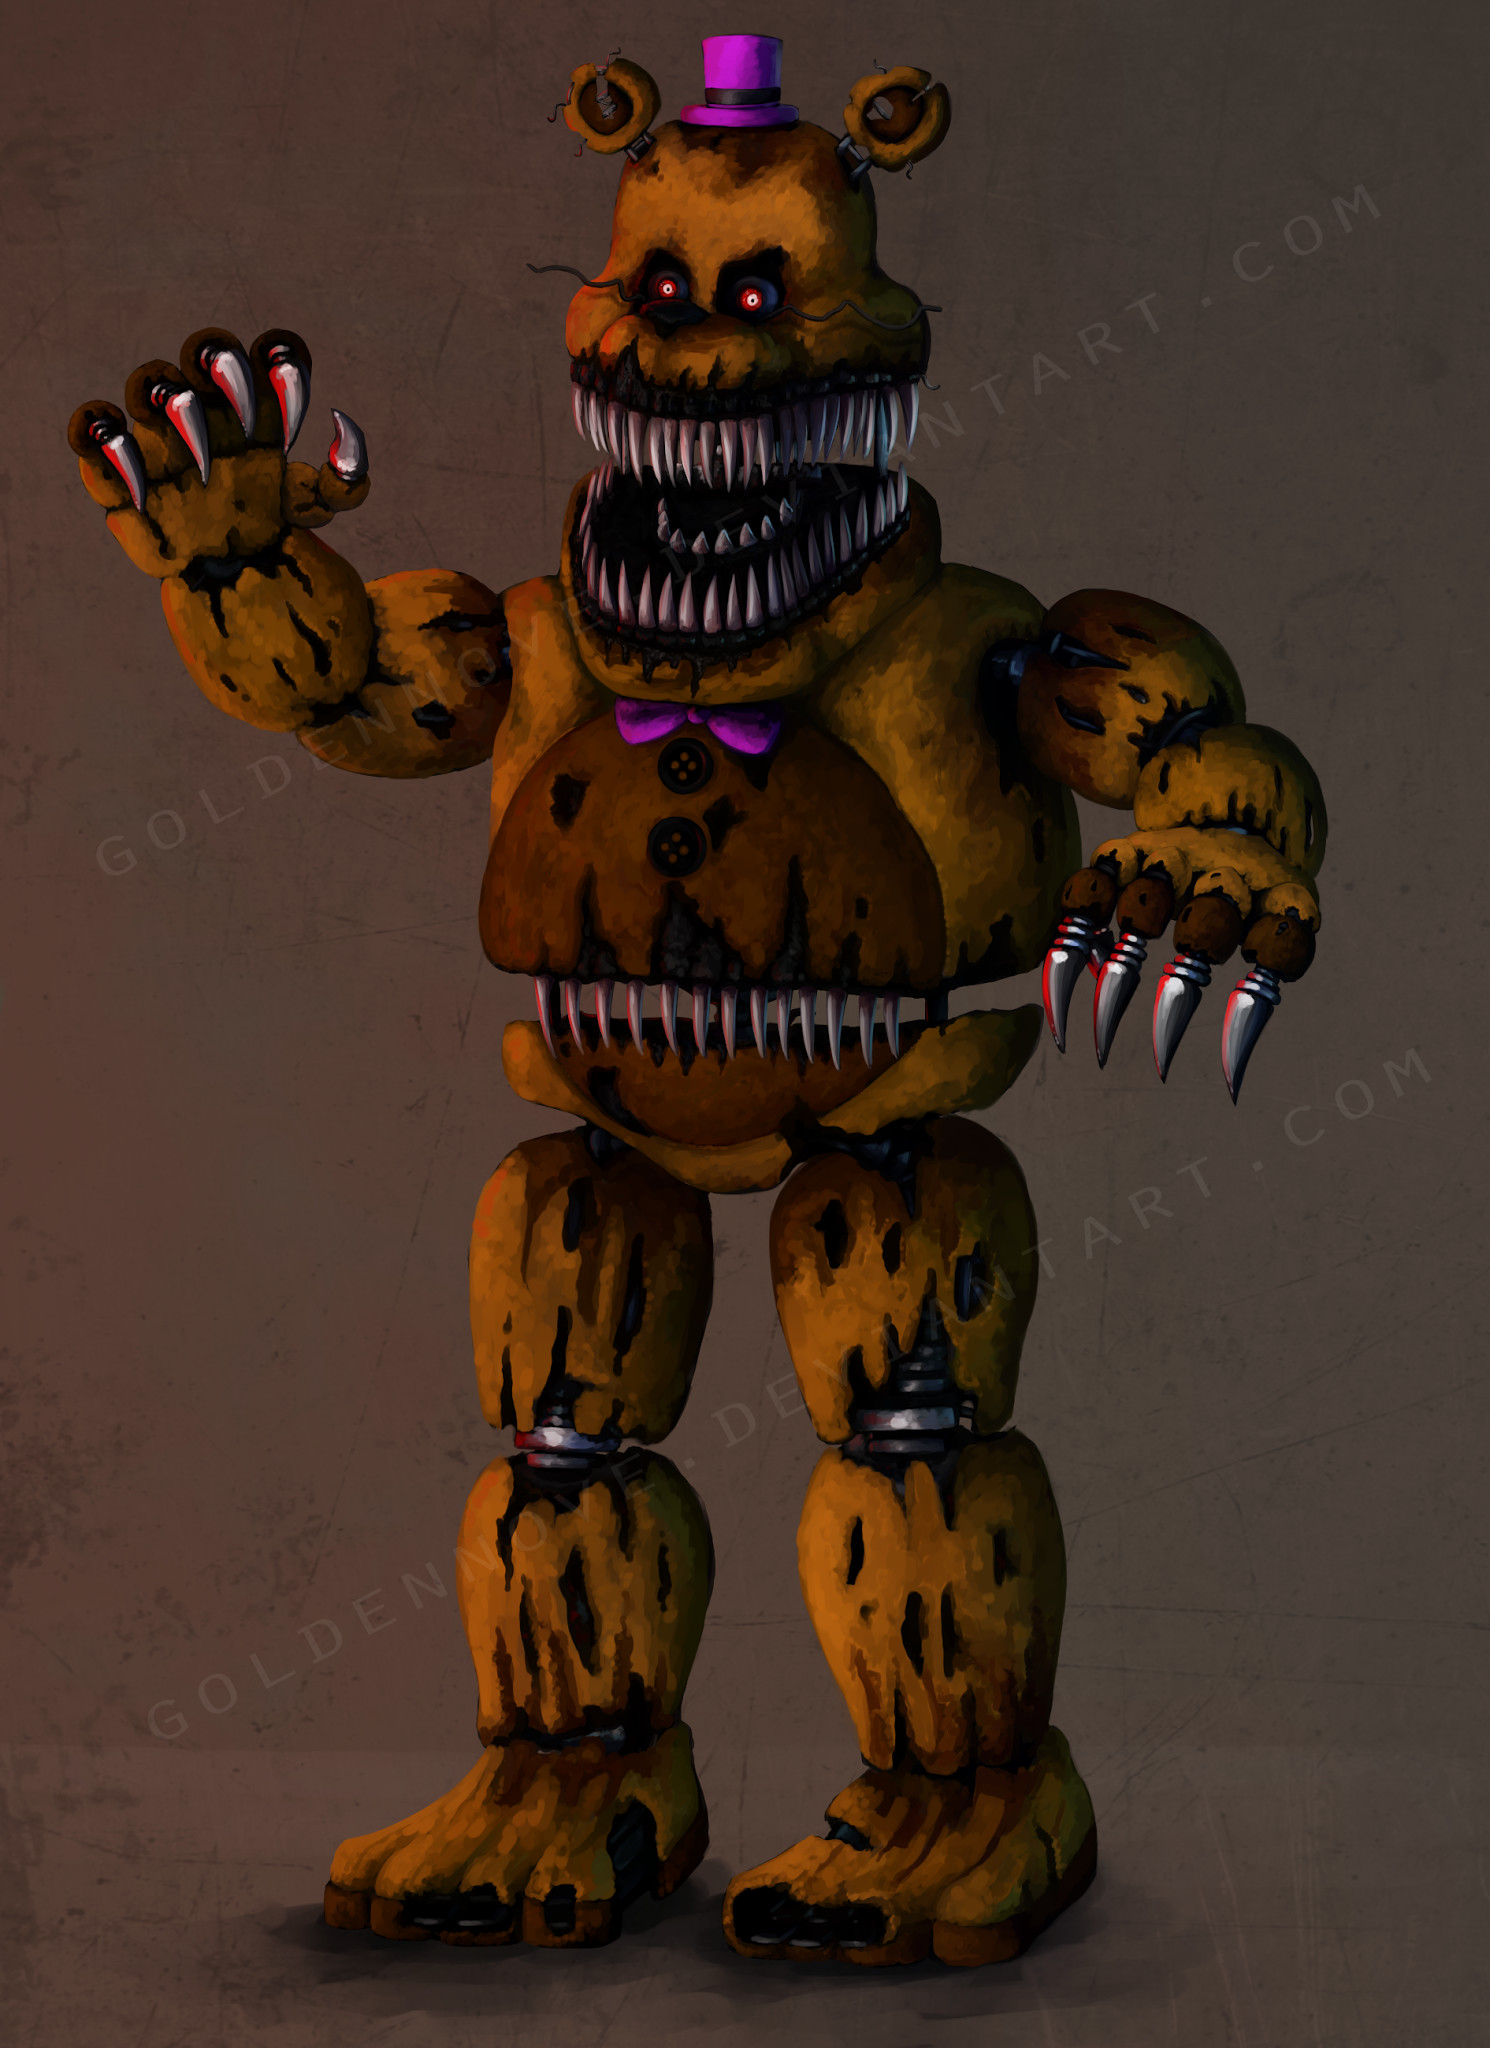 1490x2048 Incase one of the mods accept nightmare fredbear request to join png   Nightmare fred bear